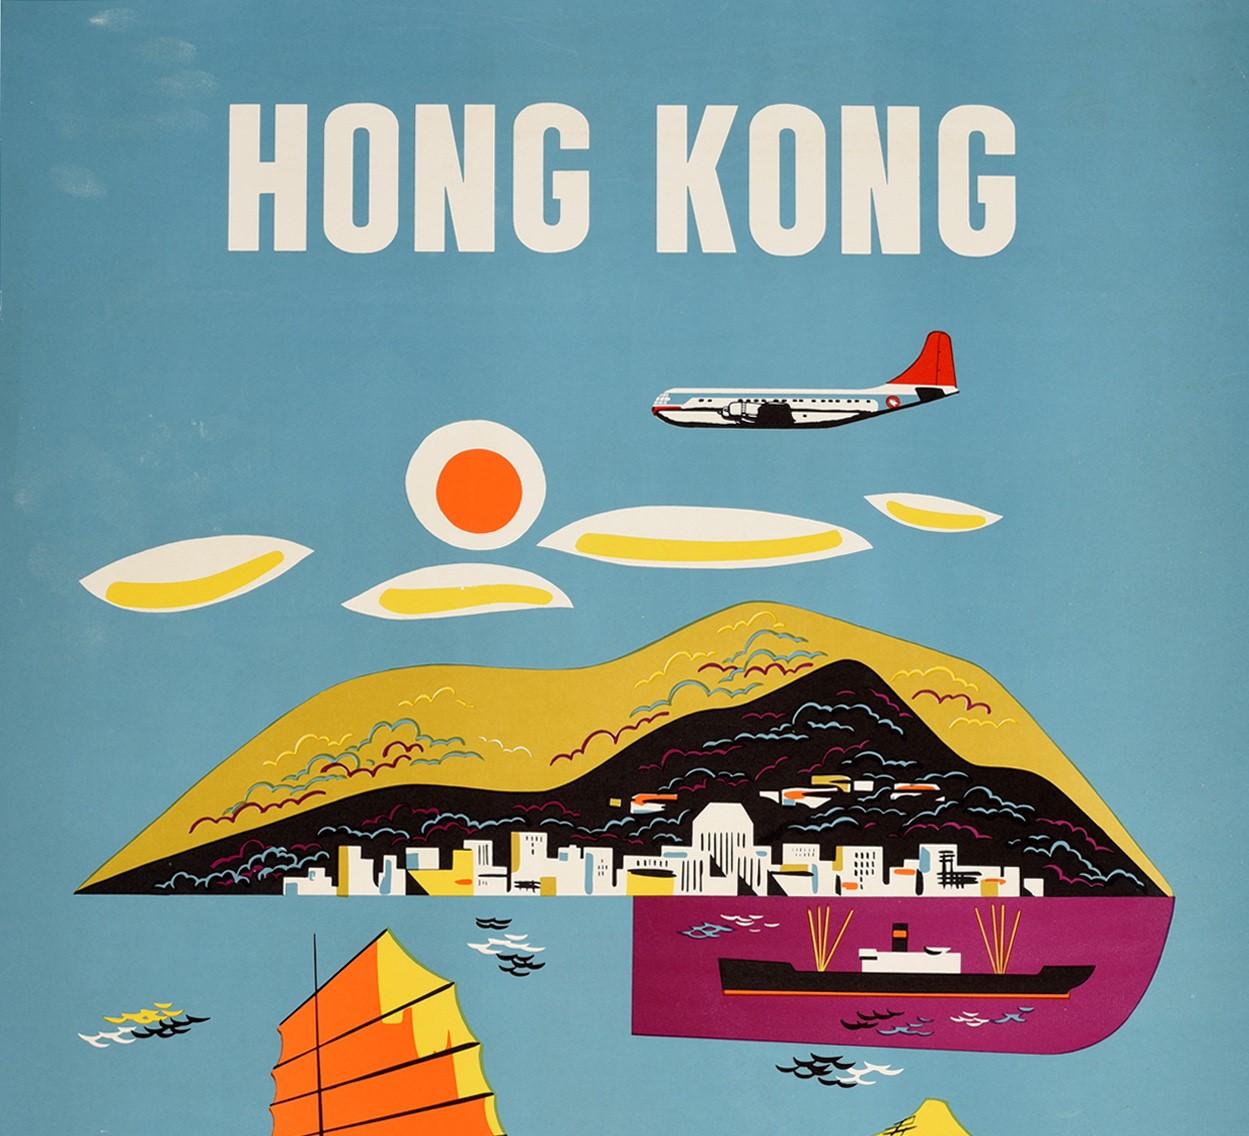 Original vintage travel poster for Hong Kong Fly Northwest Orient Airlines featuring a colourful illustration of a fisherman sitting in the foreground with Victoria Peak on Hong Kong island in the distance, trees on the hills and city buildings by